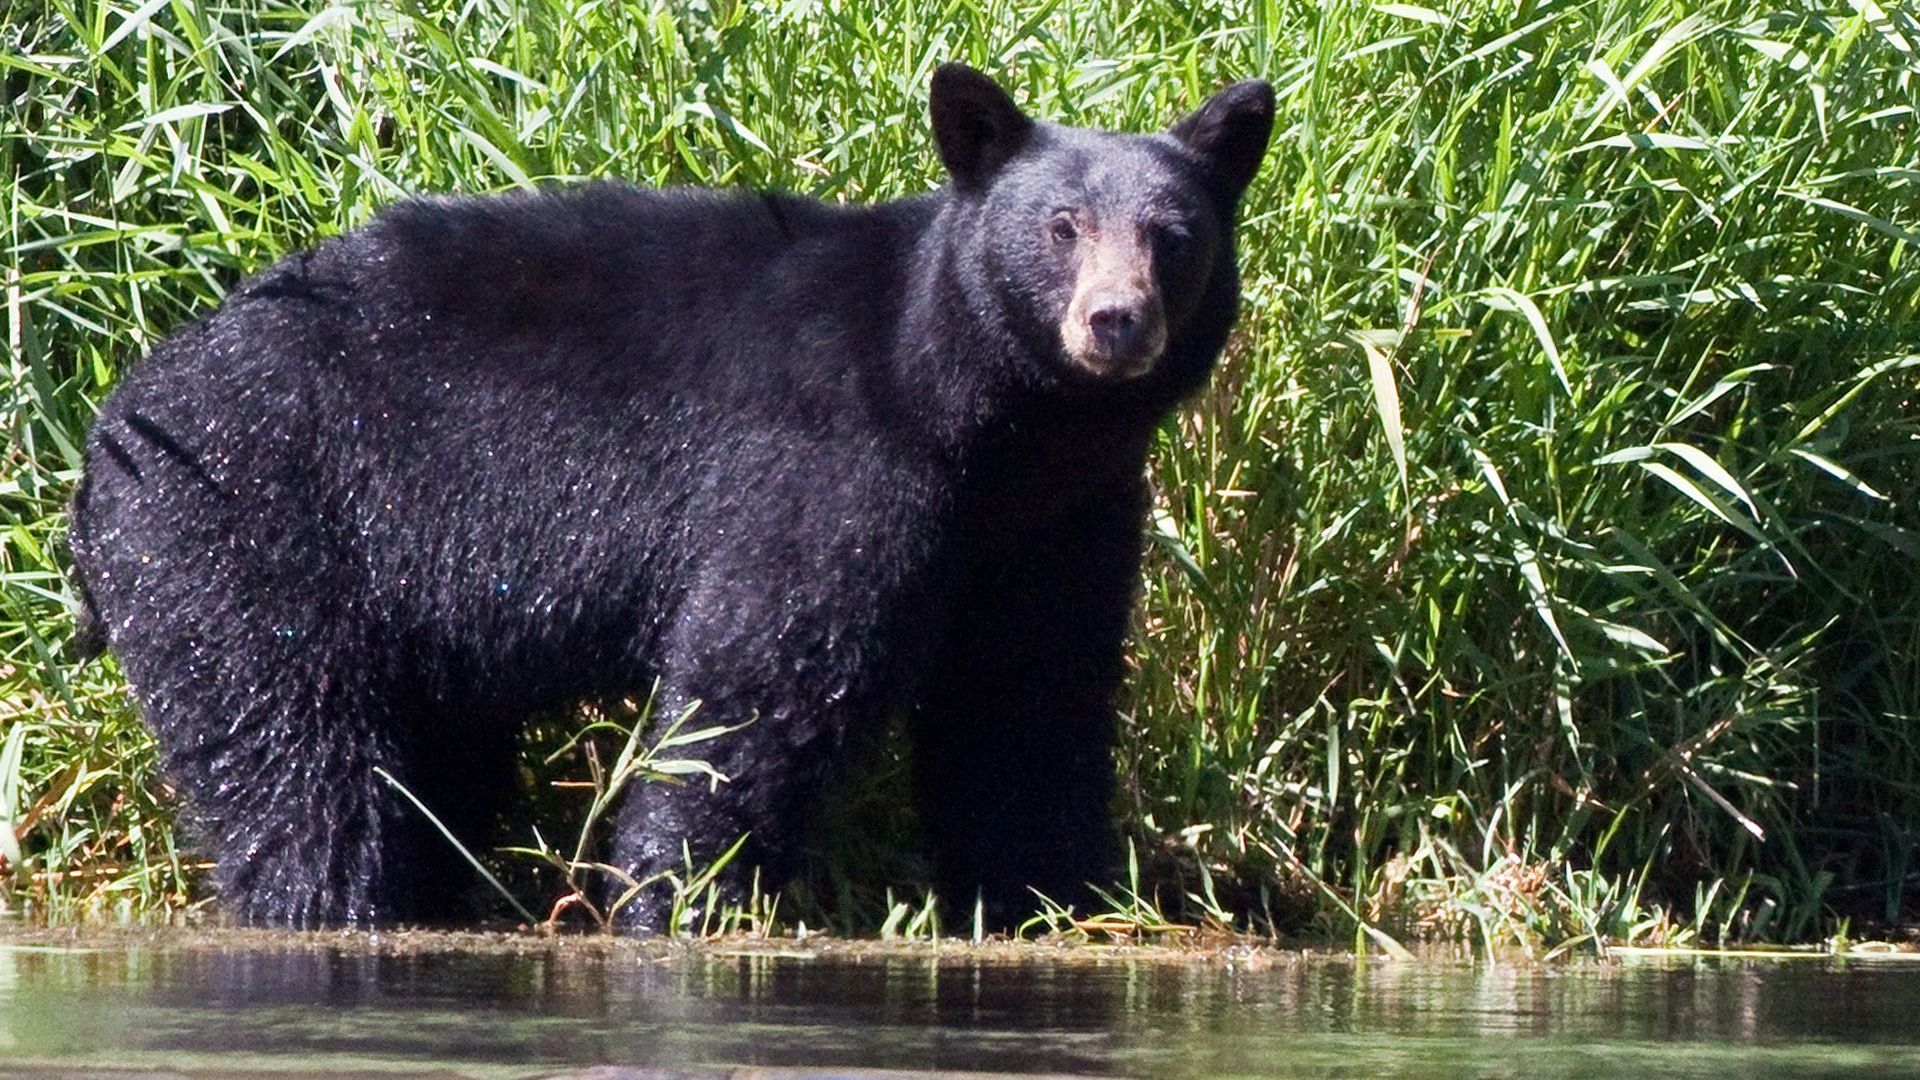 A black bear is standing in the grass near the Rogue River